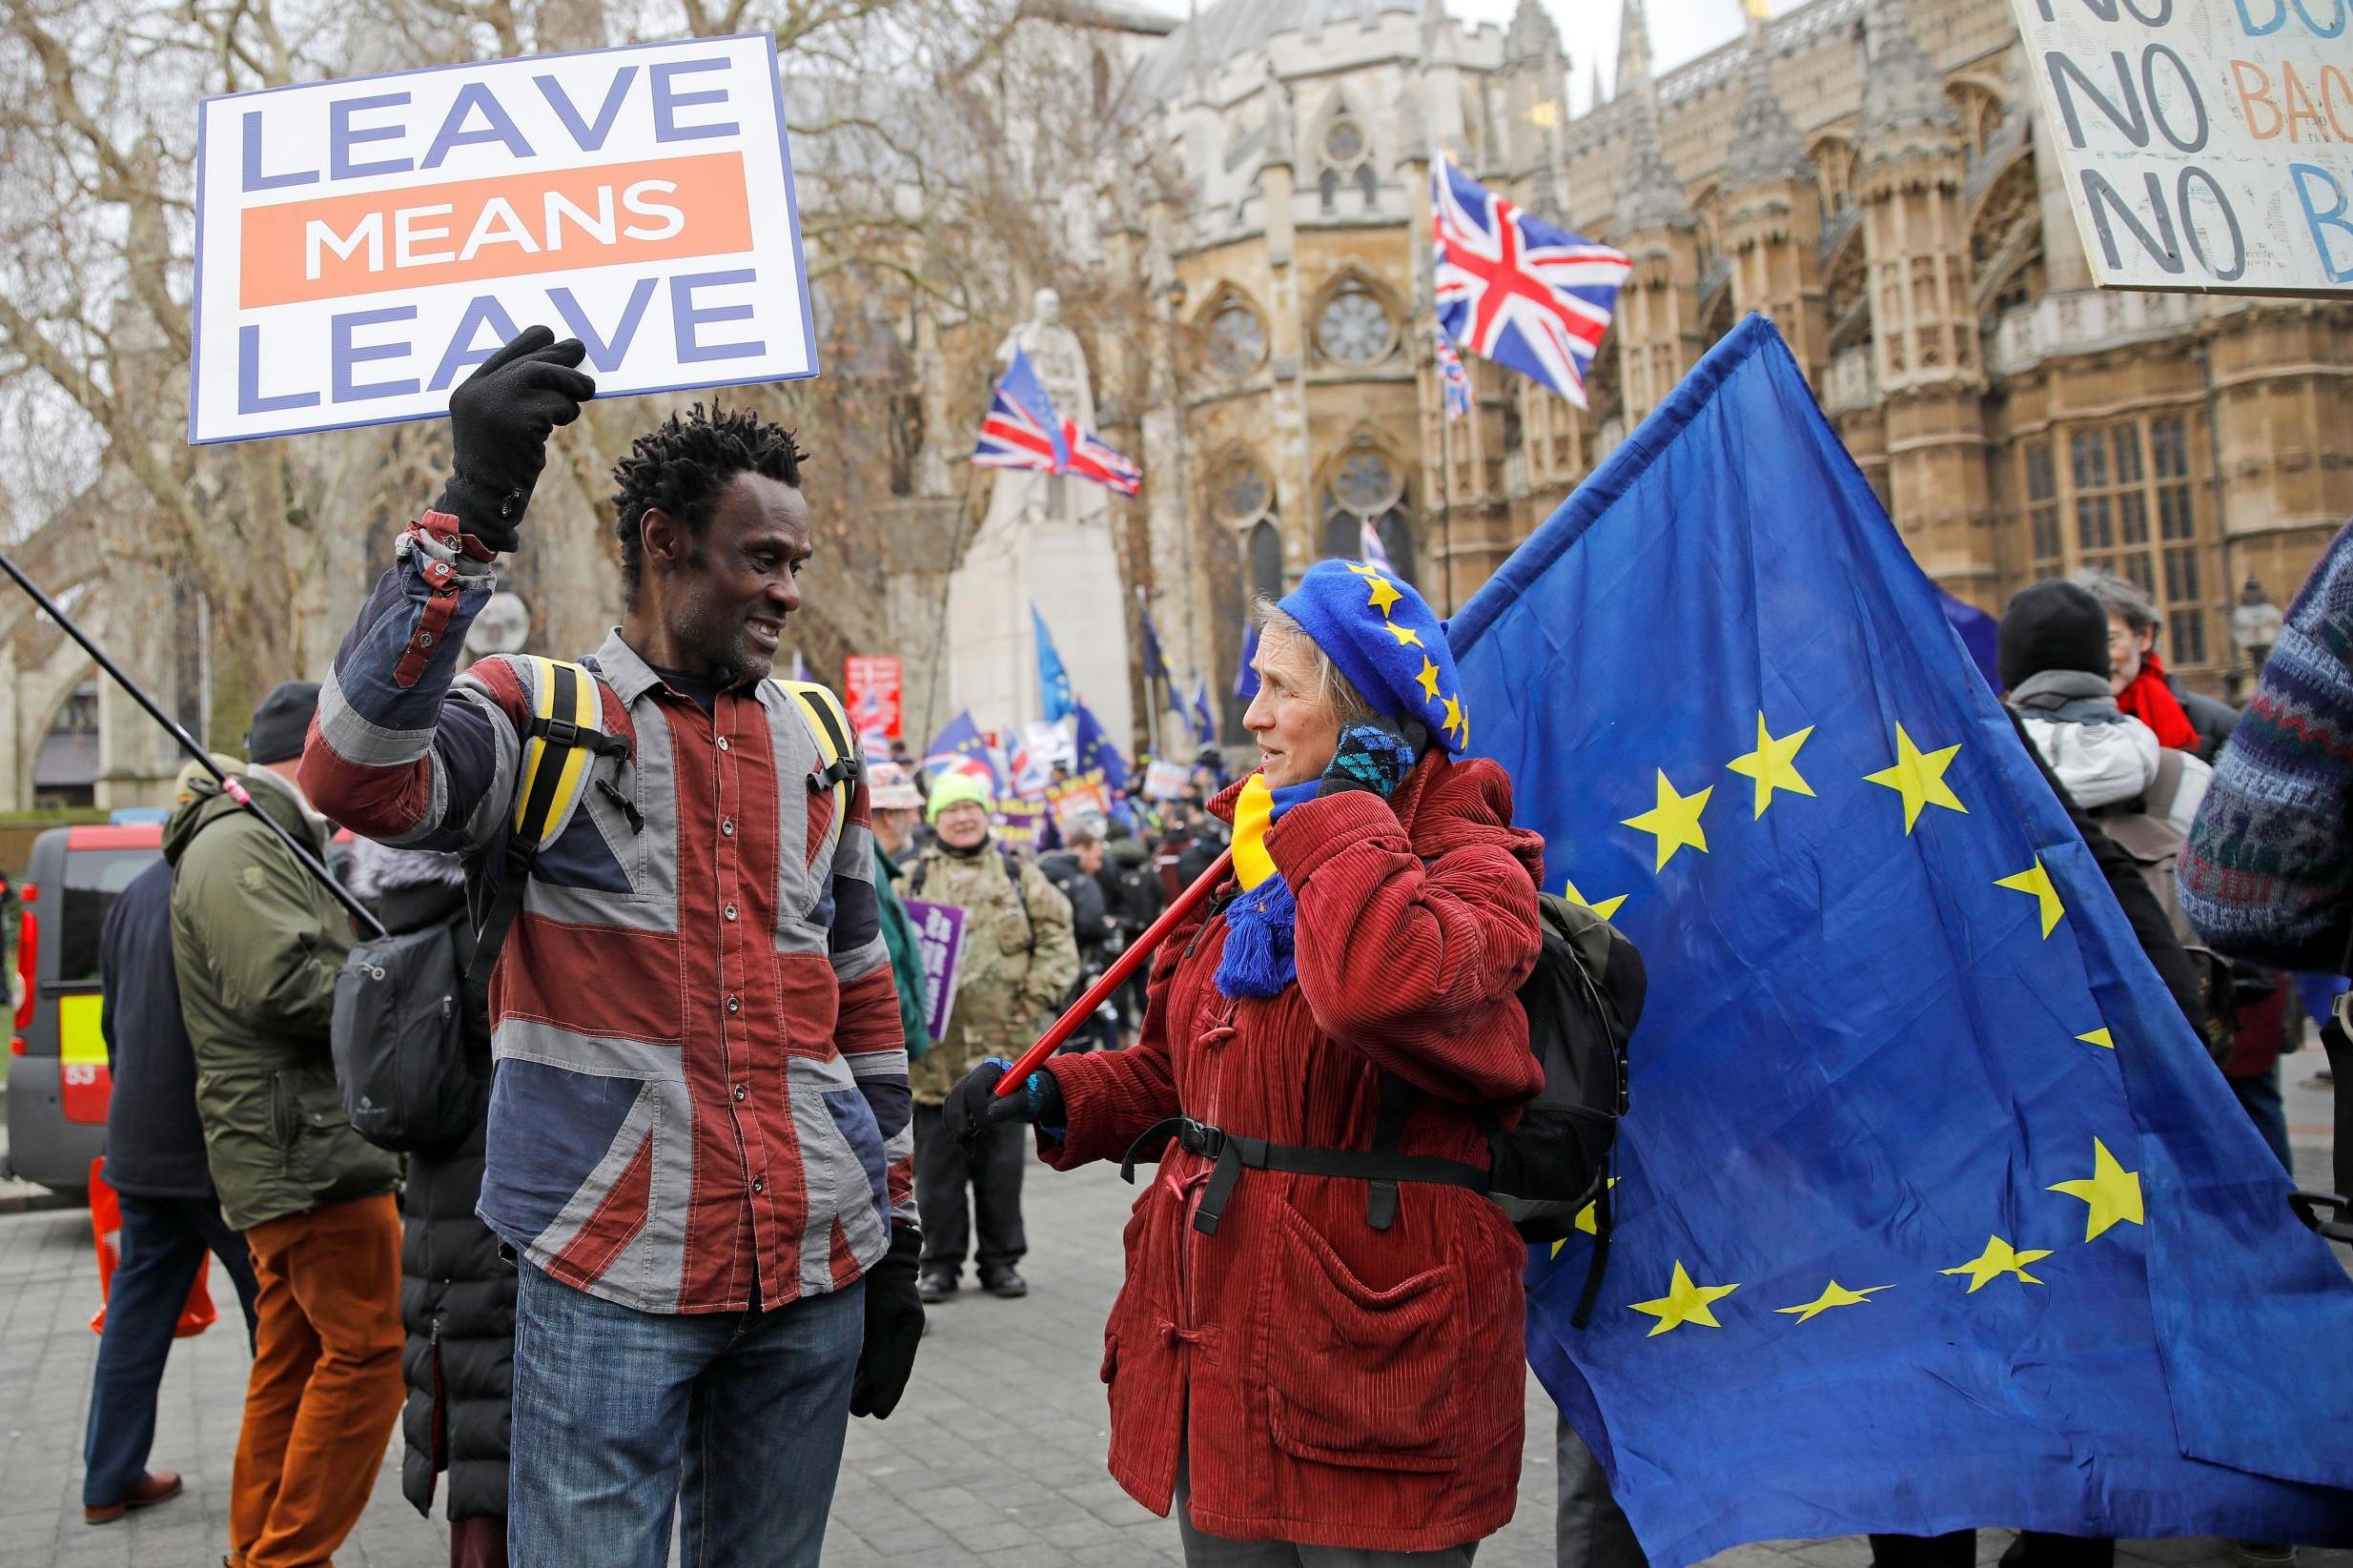 A pro-Brexit activist (left) talks with an anti-Brexit demonstrator as they protest near the Houses of Parliament